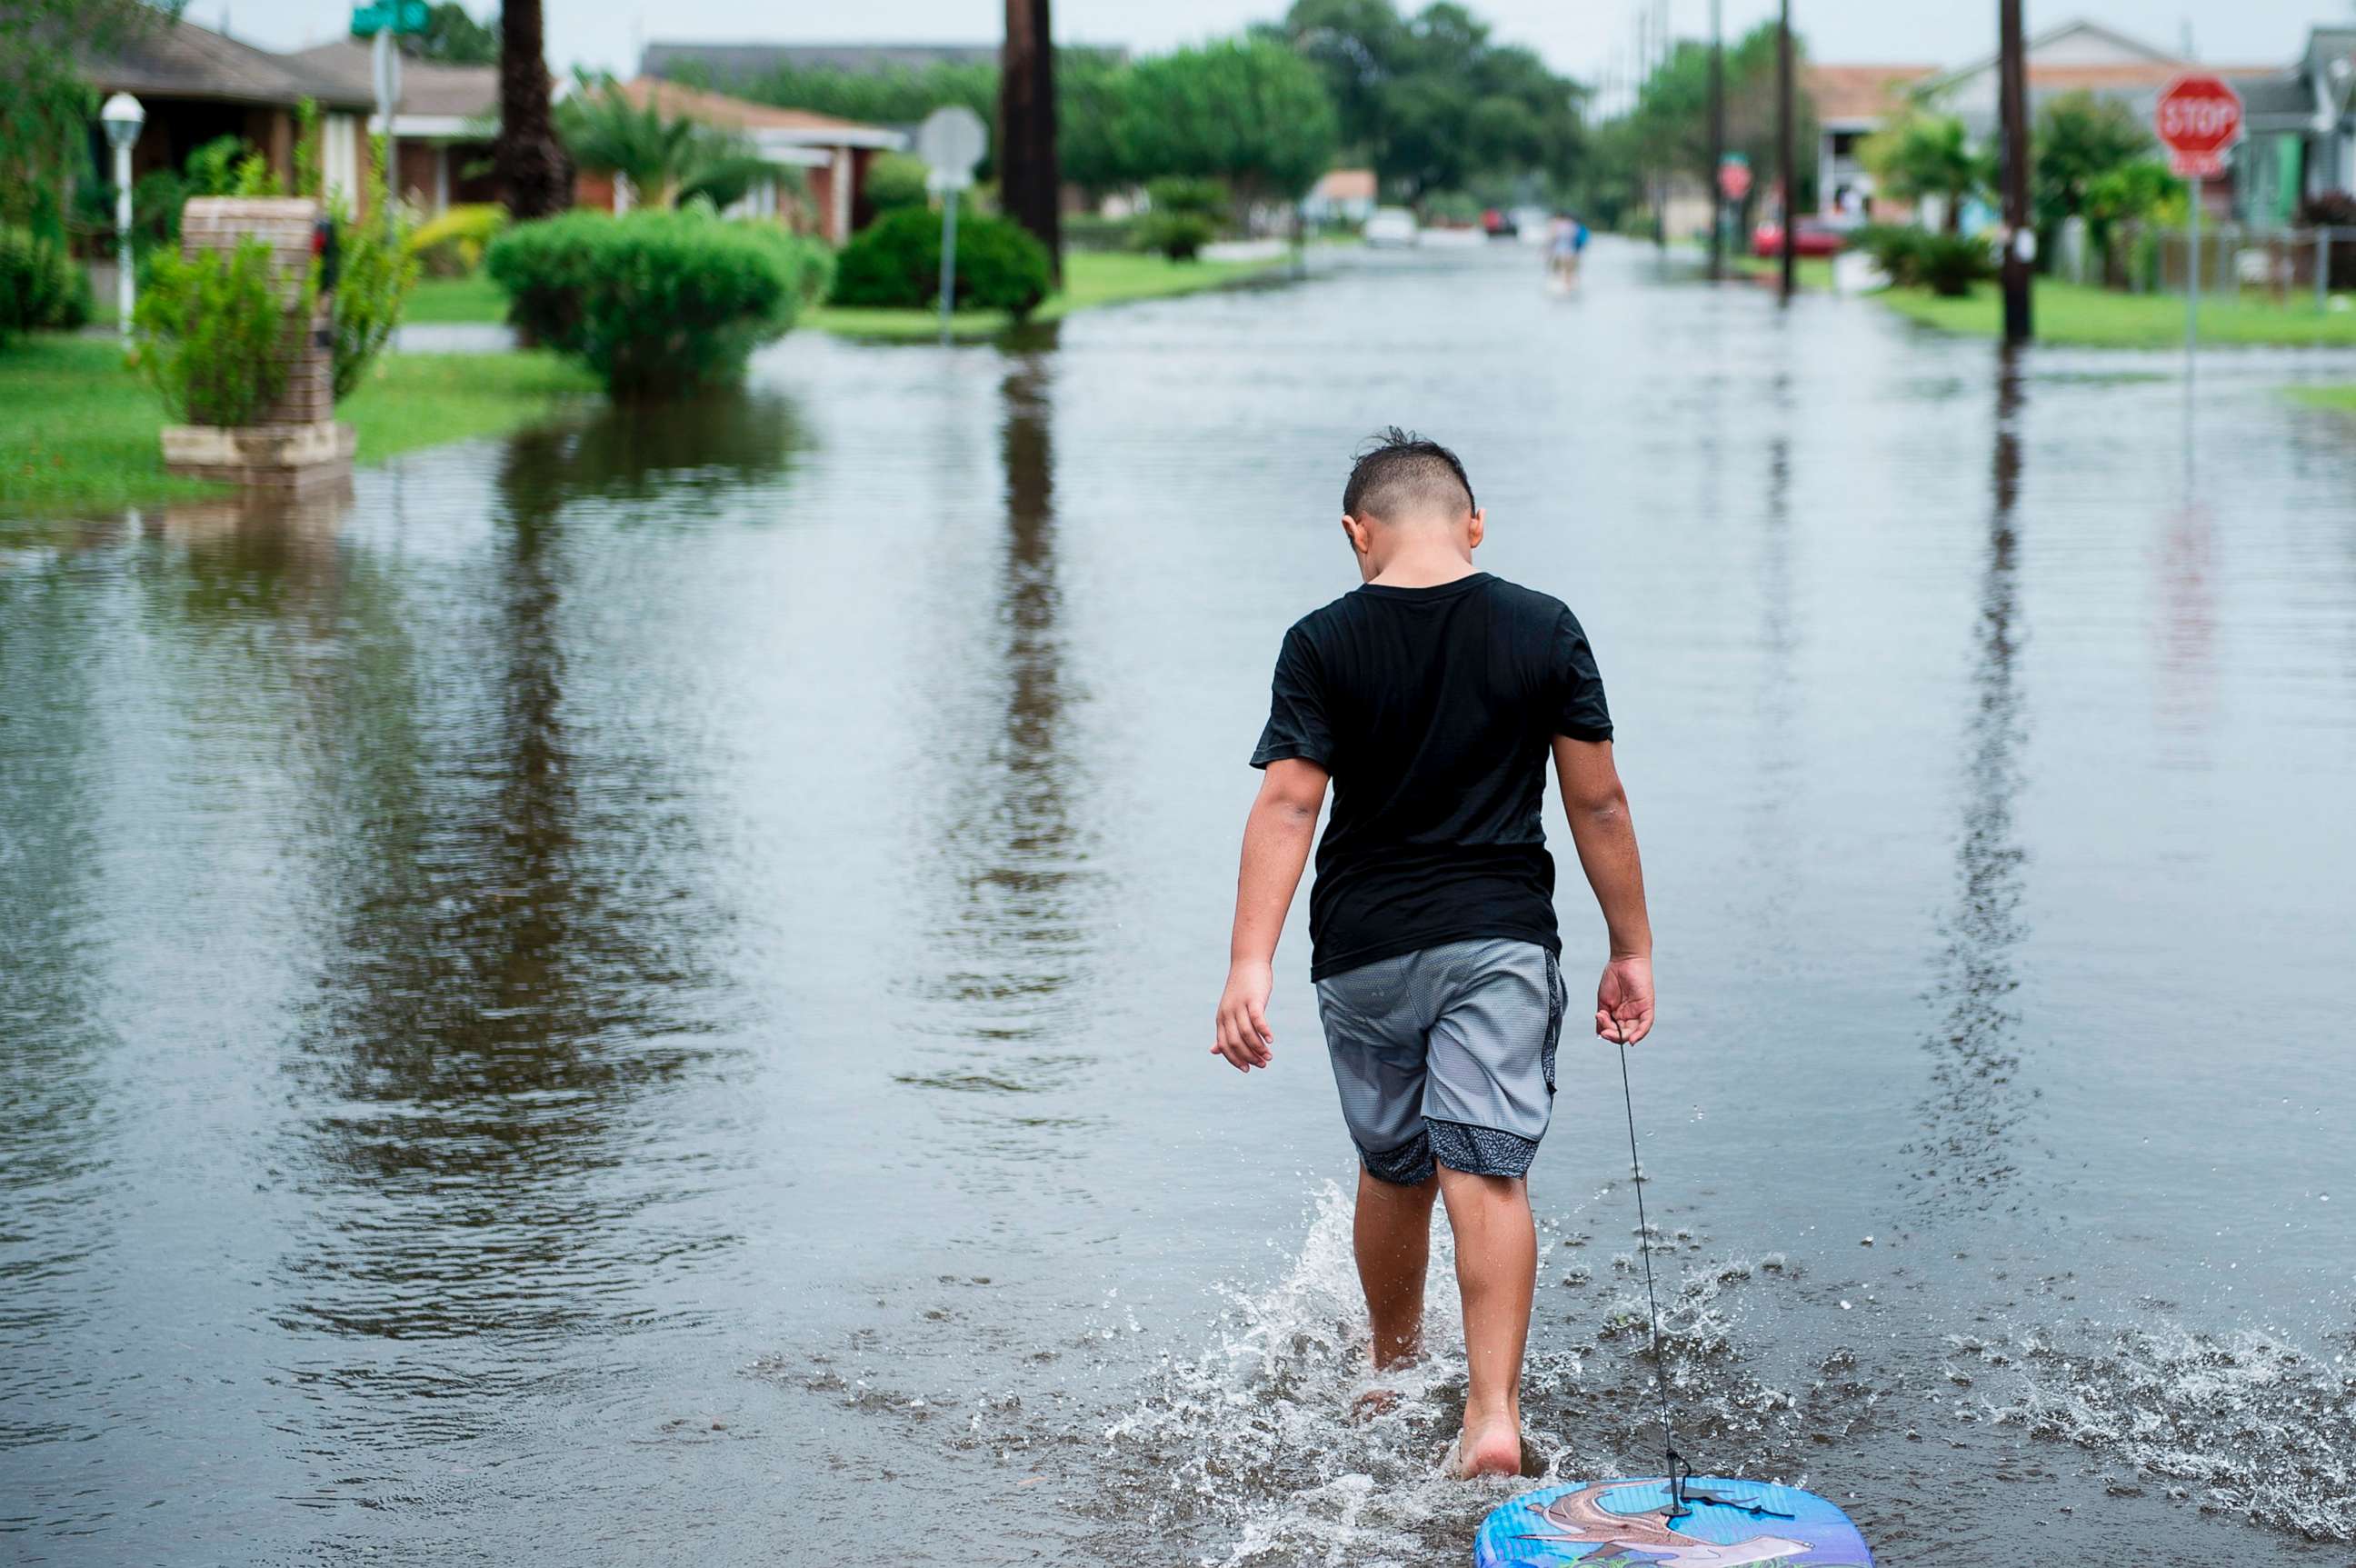 PHOTO: A boy walks with a bodyboard through a flooded street as the effects of Hurricane Harvey are seen Aug. 26, 2017 in Galveston, Texas.